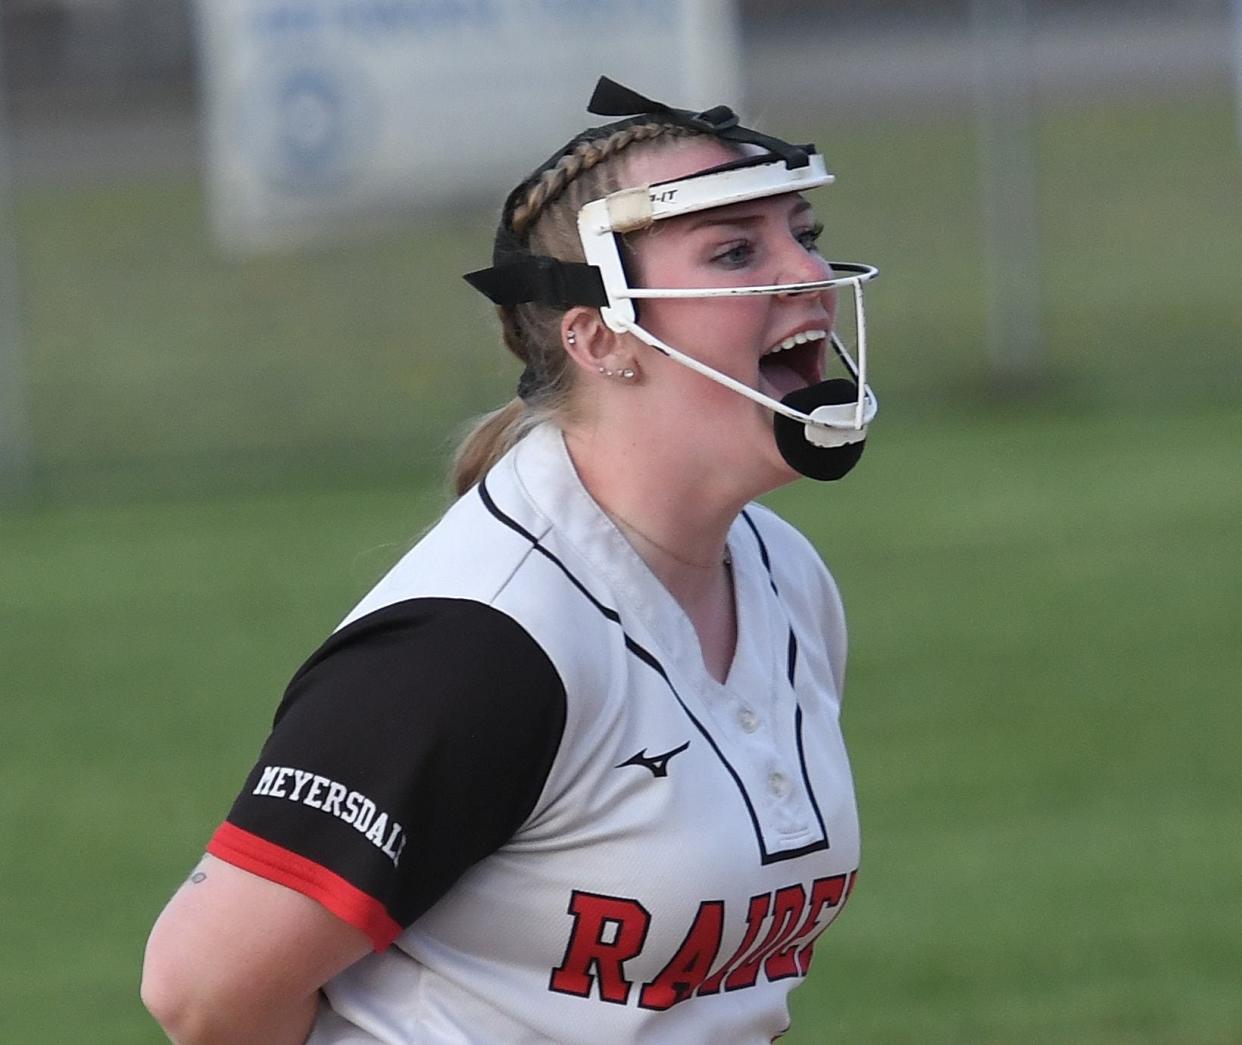 Meyersdale pitcher Izabella Donaldson reacts after recording her 13th strikeout to end the game against Berlin Brothersvalley during an Inter-County Conference softball matchup, April 25, in Meyersdale.